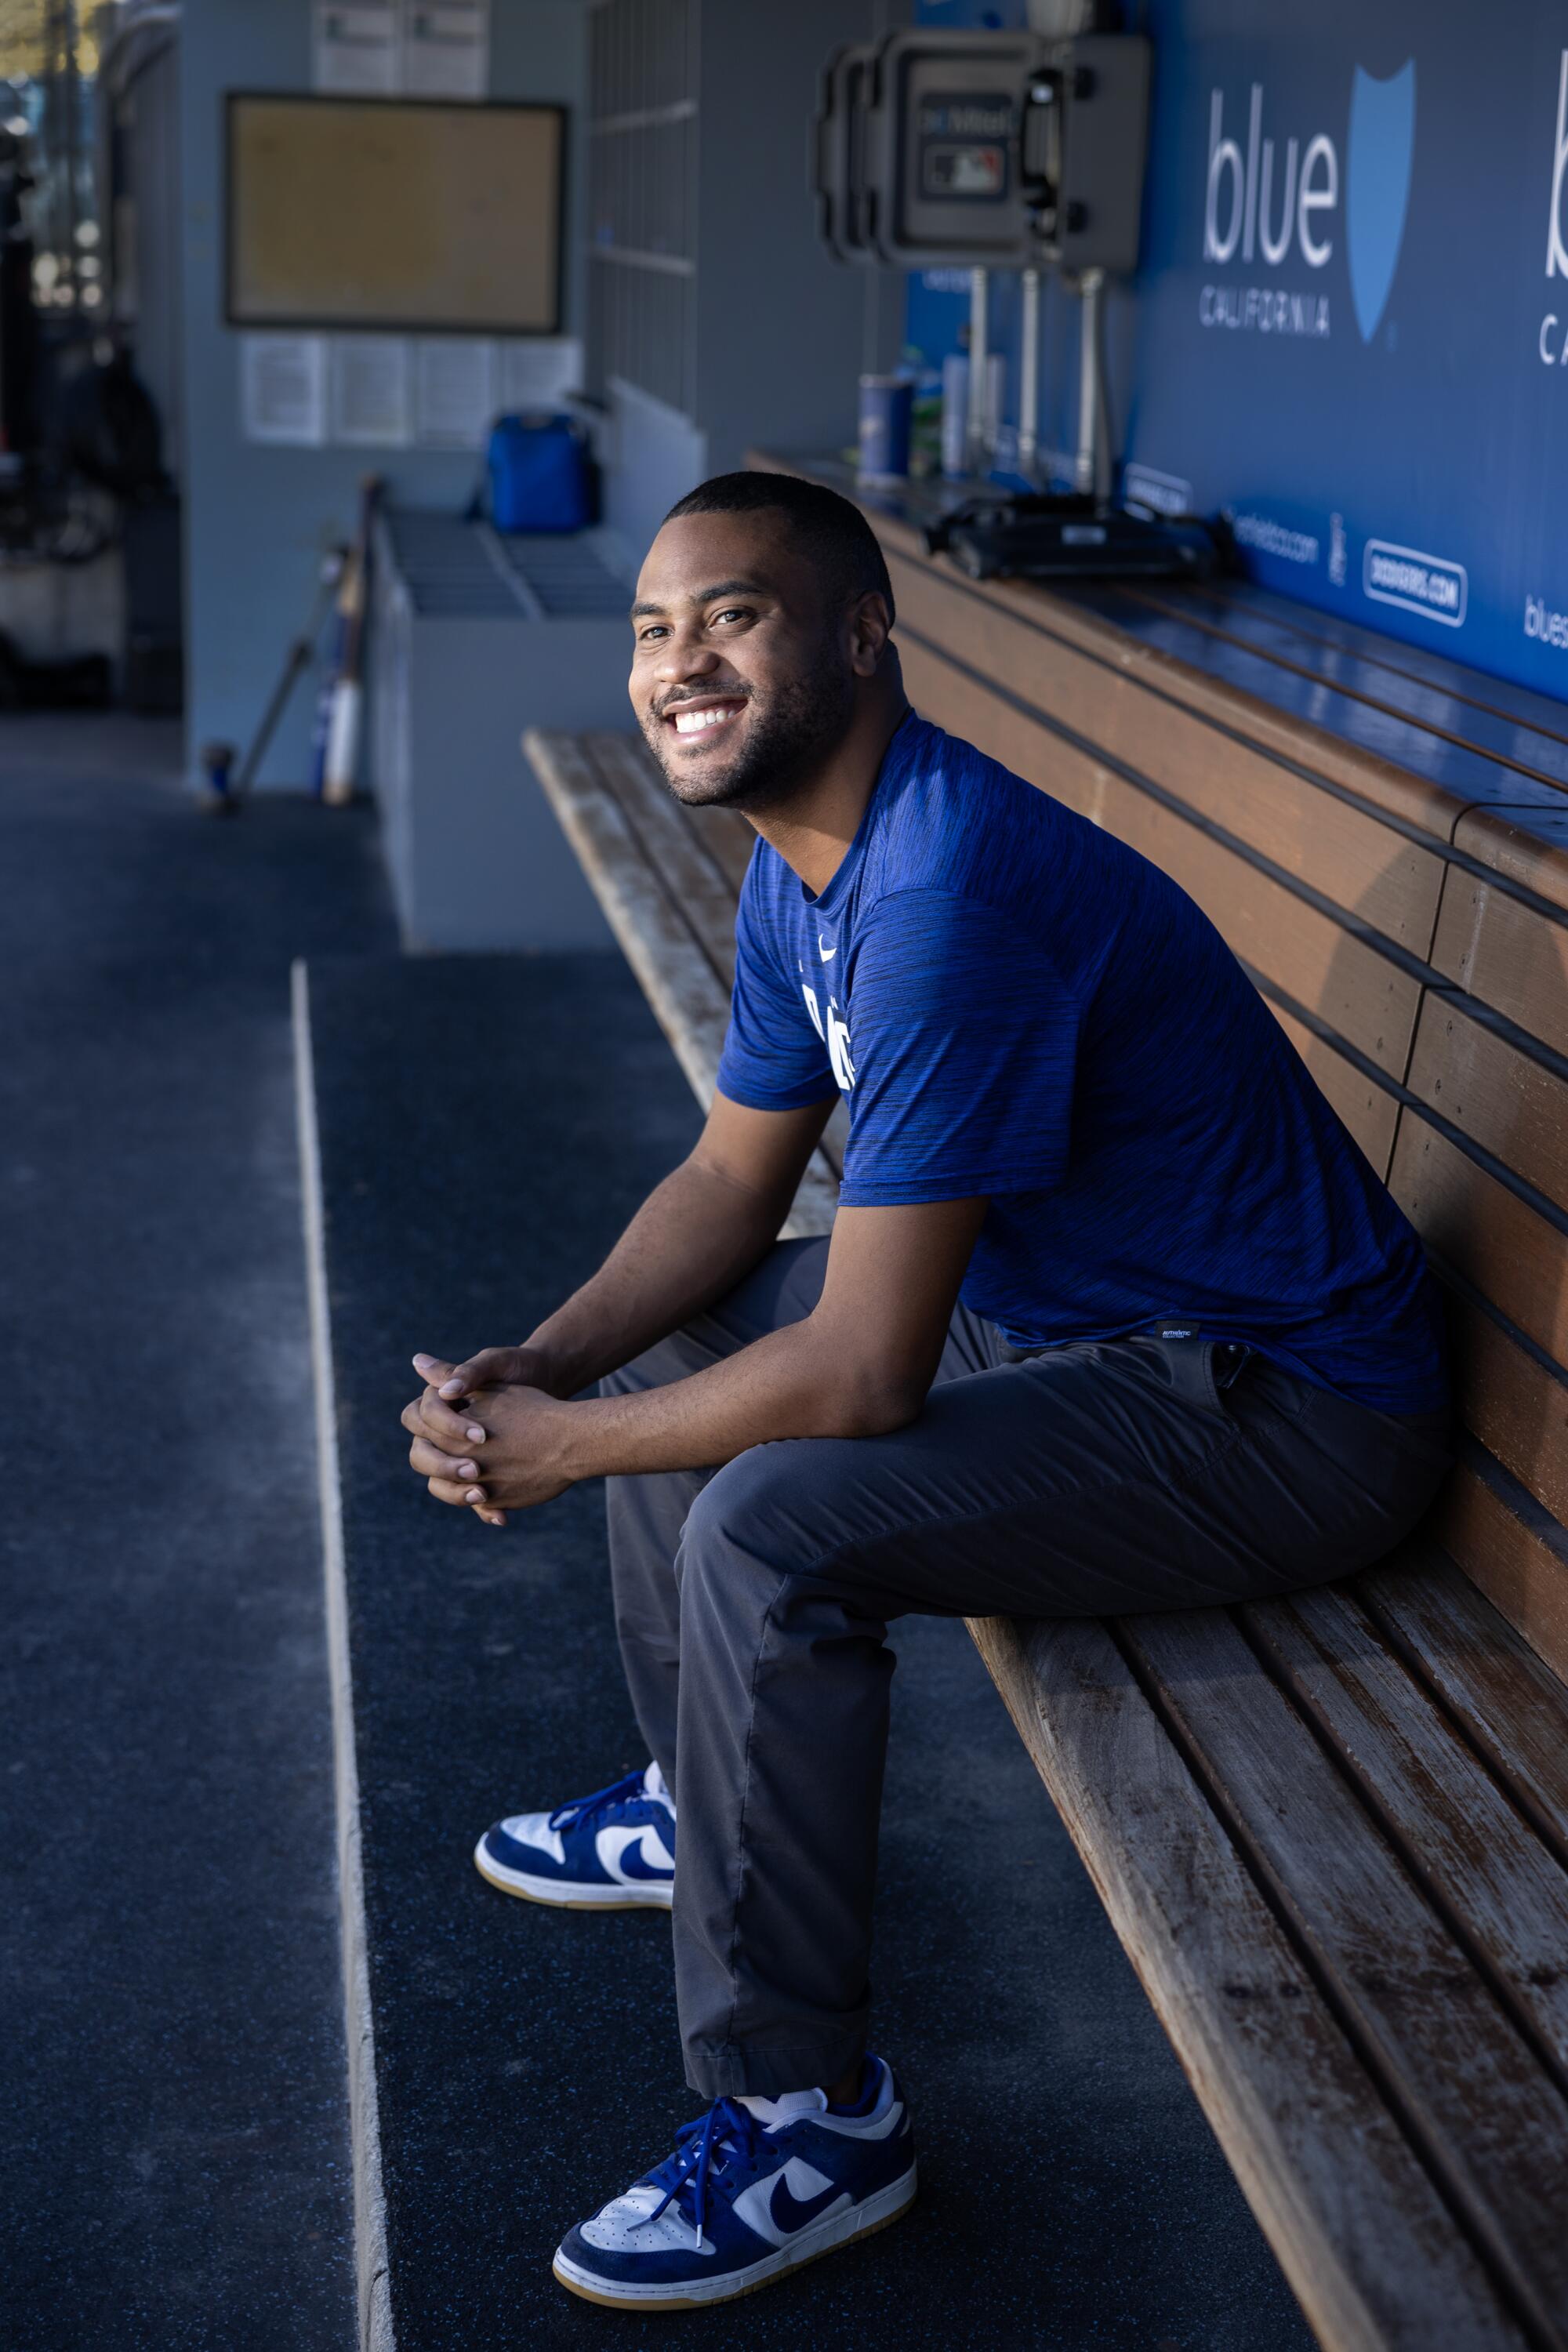 RJ Peete smiles while sitting in the Dodgers dugout.